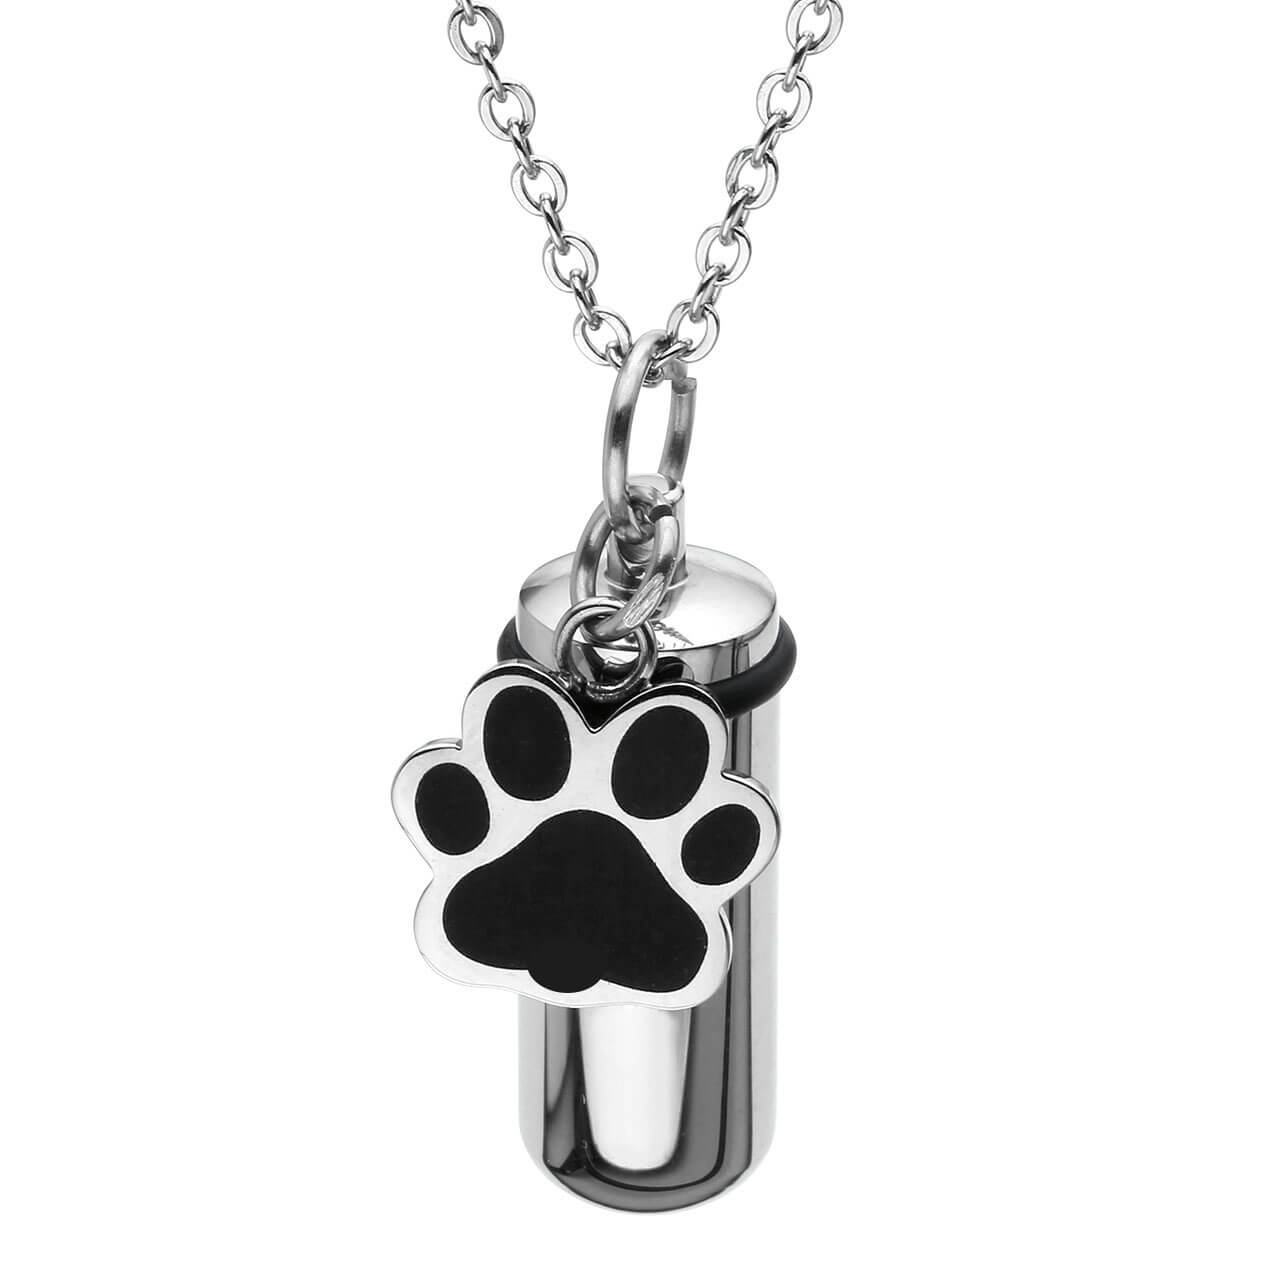 Jovivi dog paw pet urn necklace for ashes memorial keepsake jewelry, jng049501